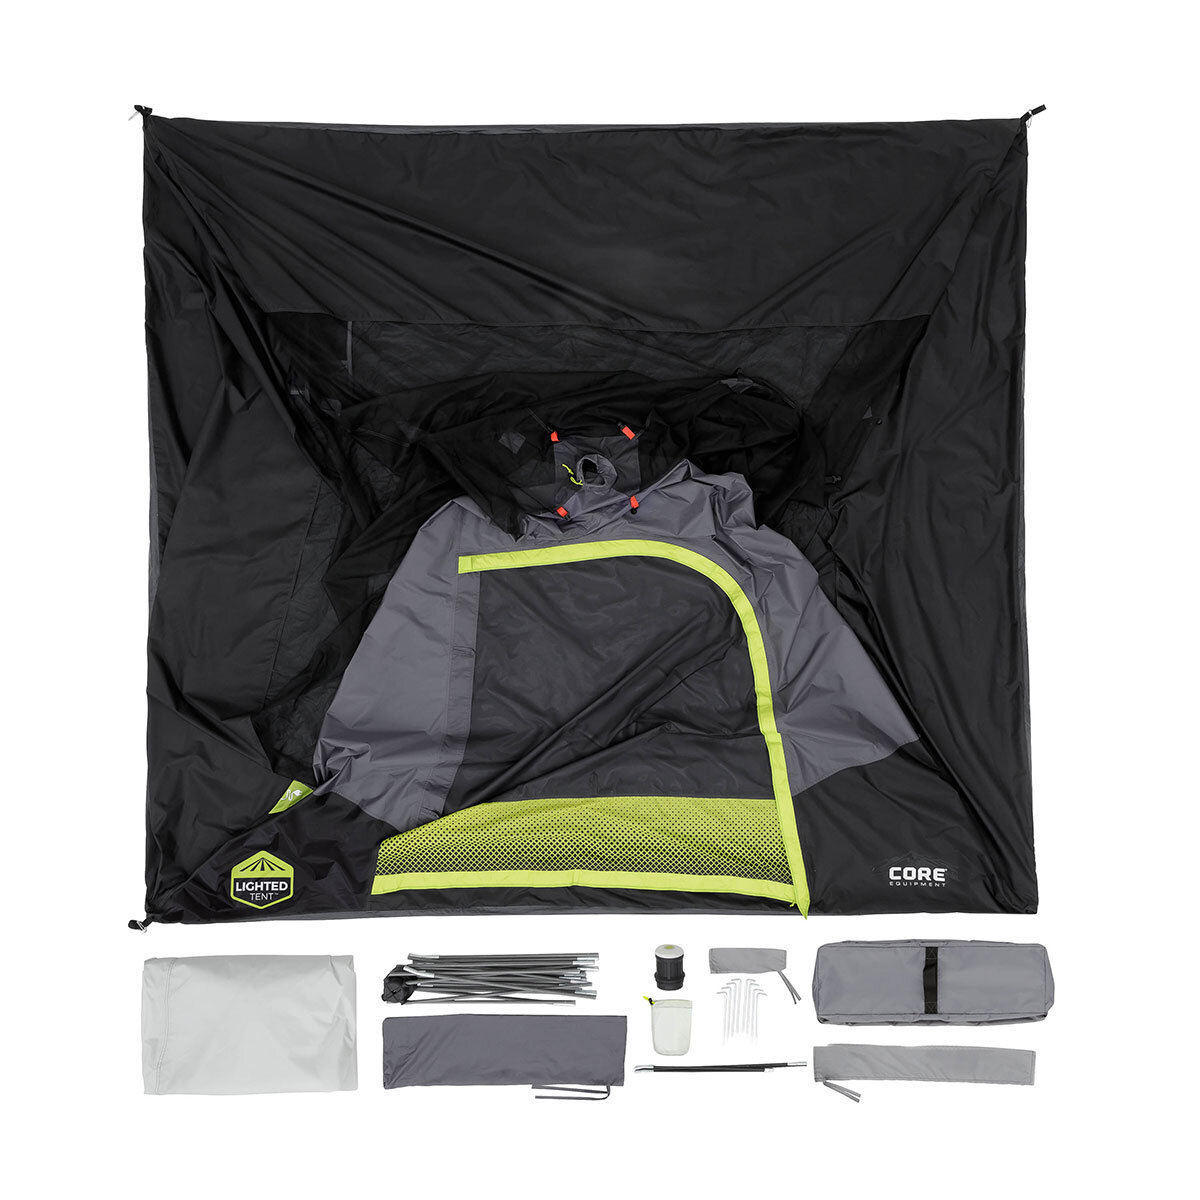 $99 buy 6 person tent. Anyone have it? Any good? : r/Costco